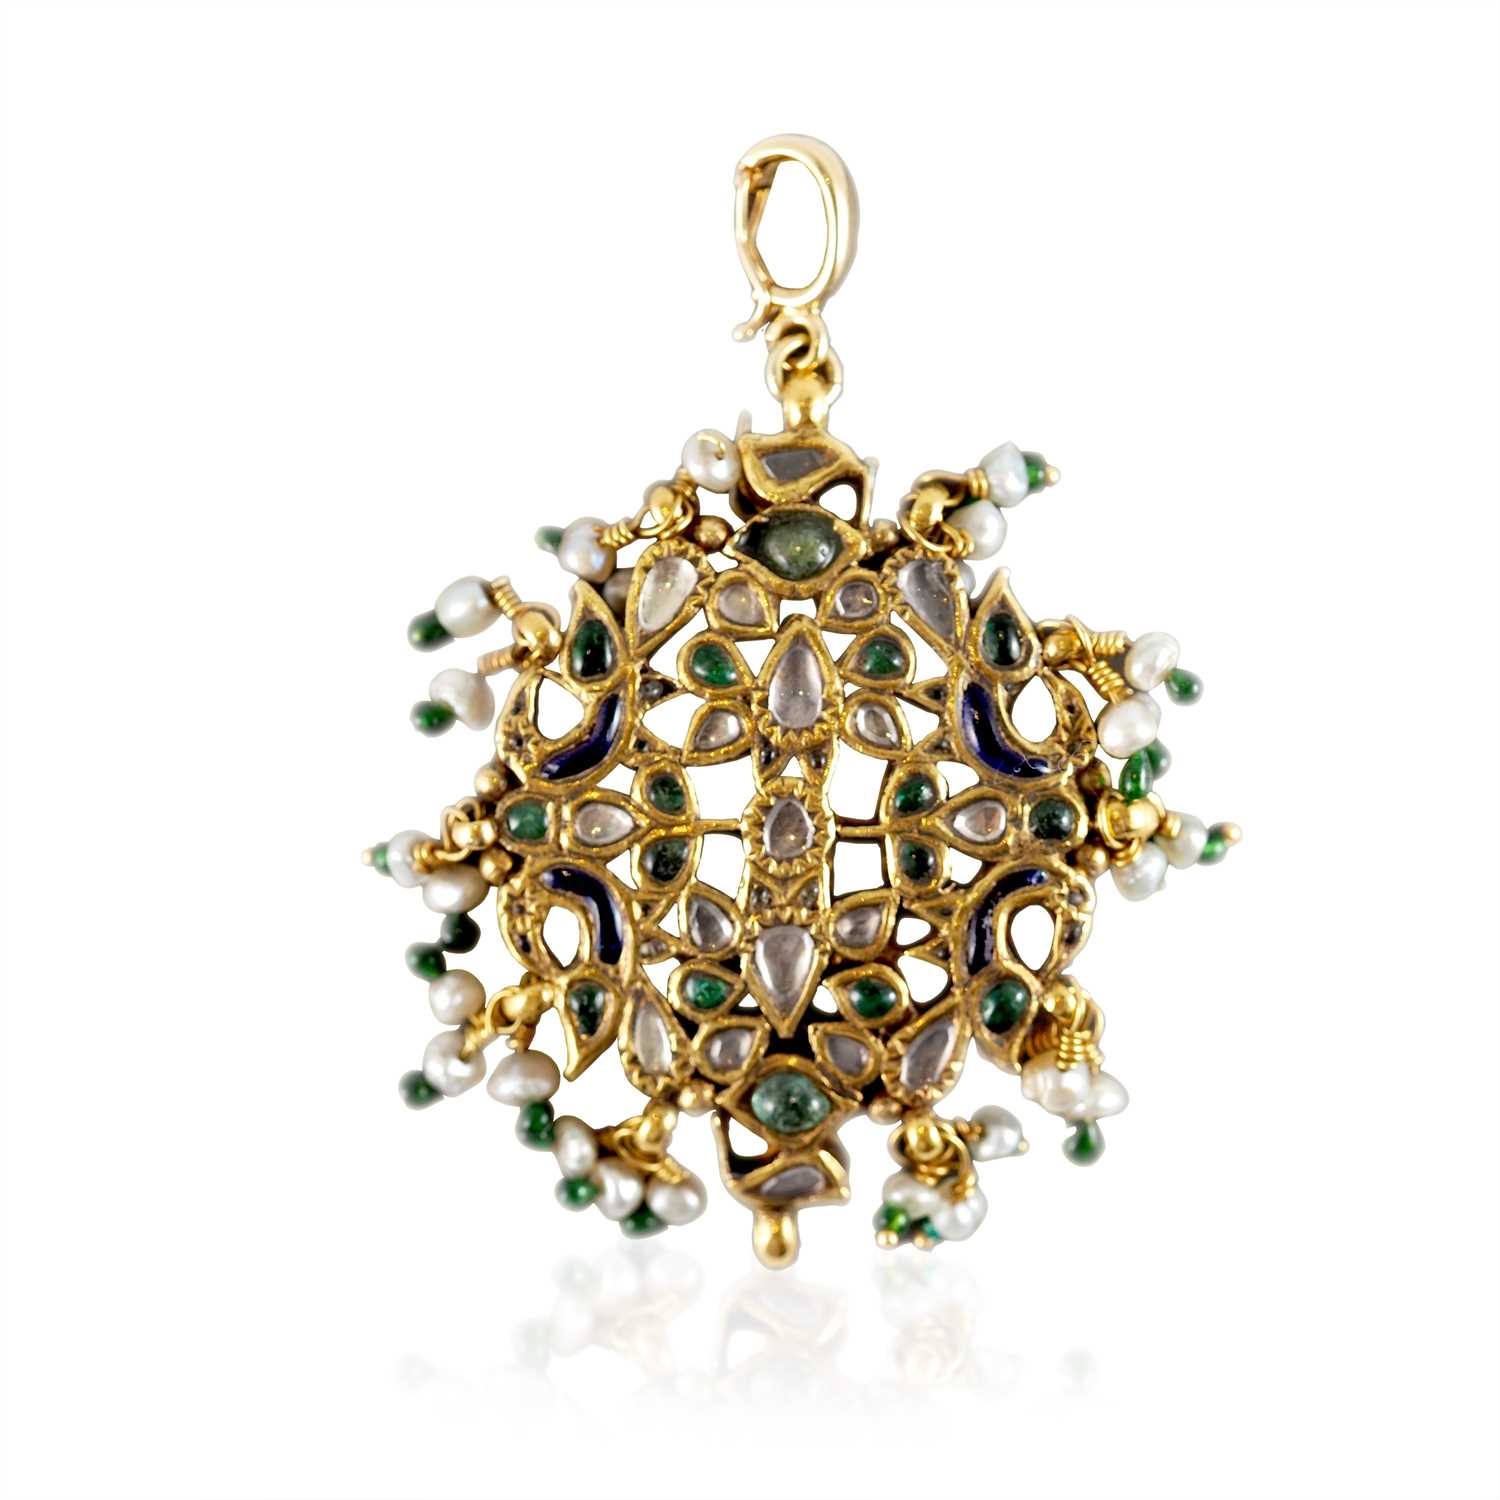 Lot 525 - 22K Gold, and Multi Gem Mughal Style Pendant